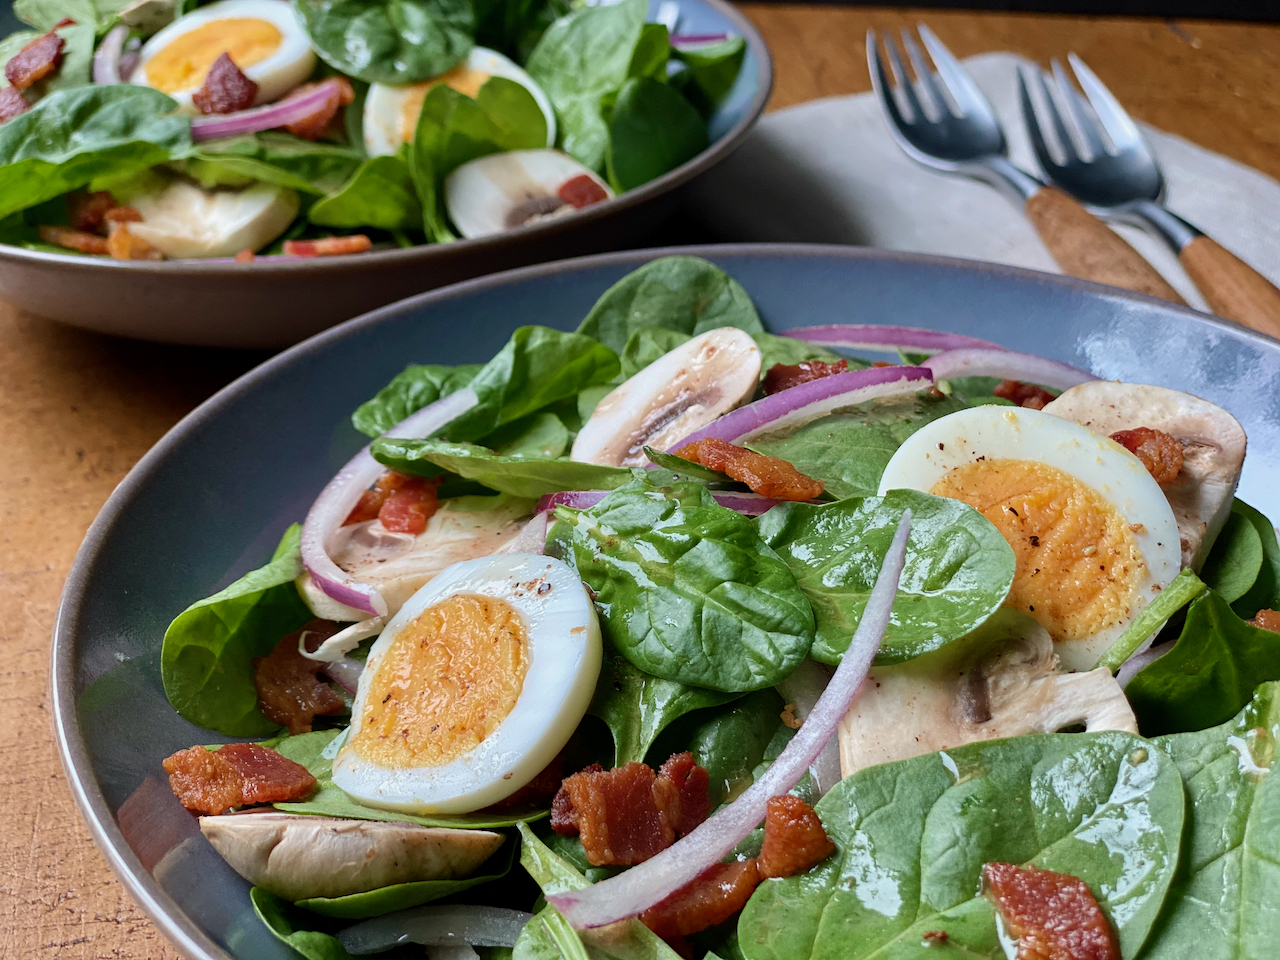 Bowl showing a serving of spinach salad with warm bacon dressing. The salad features vibrant green spinach leaves arranged neatly, topped with crispy bacon, sliced hard boiled eggs and sliced red onions.